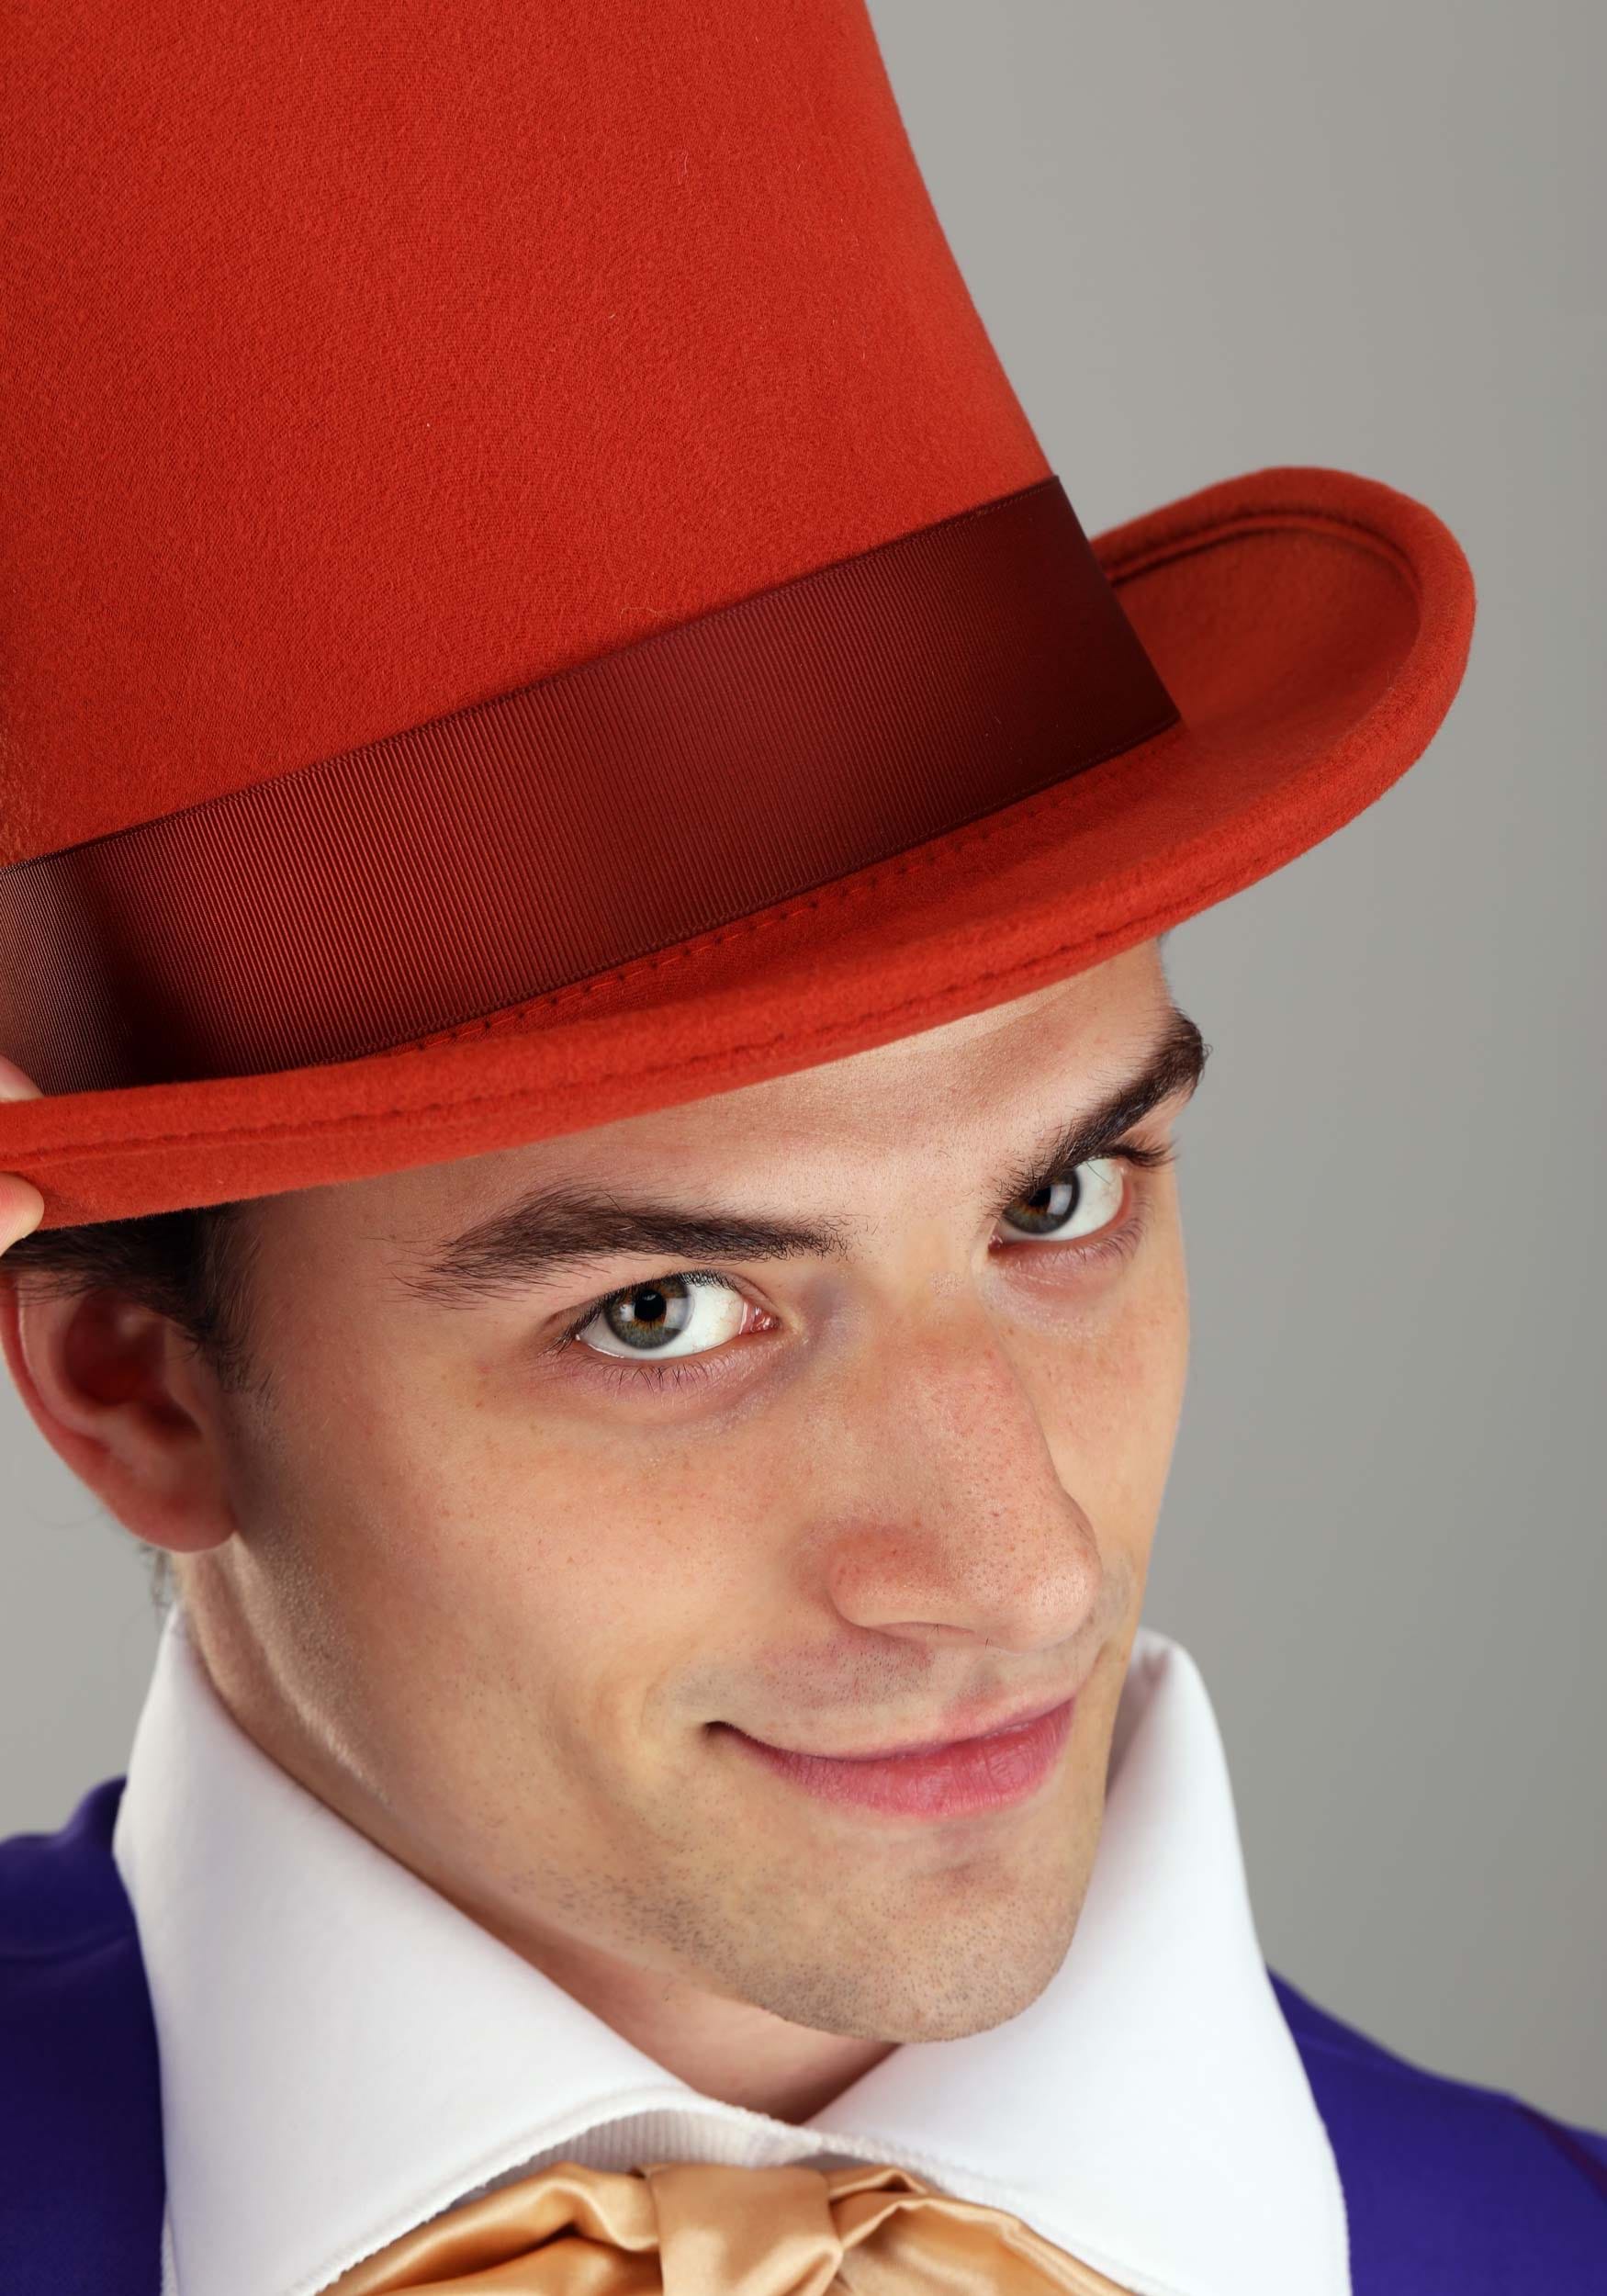 Authentic Willy Wonka Hat For Men , Costume Hat Accessories